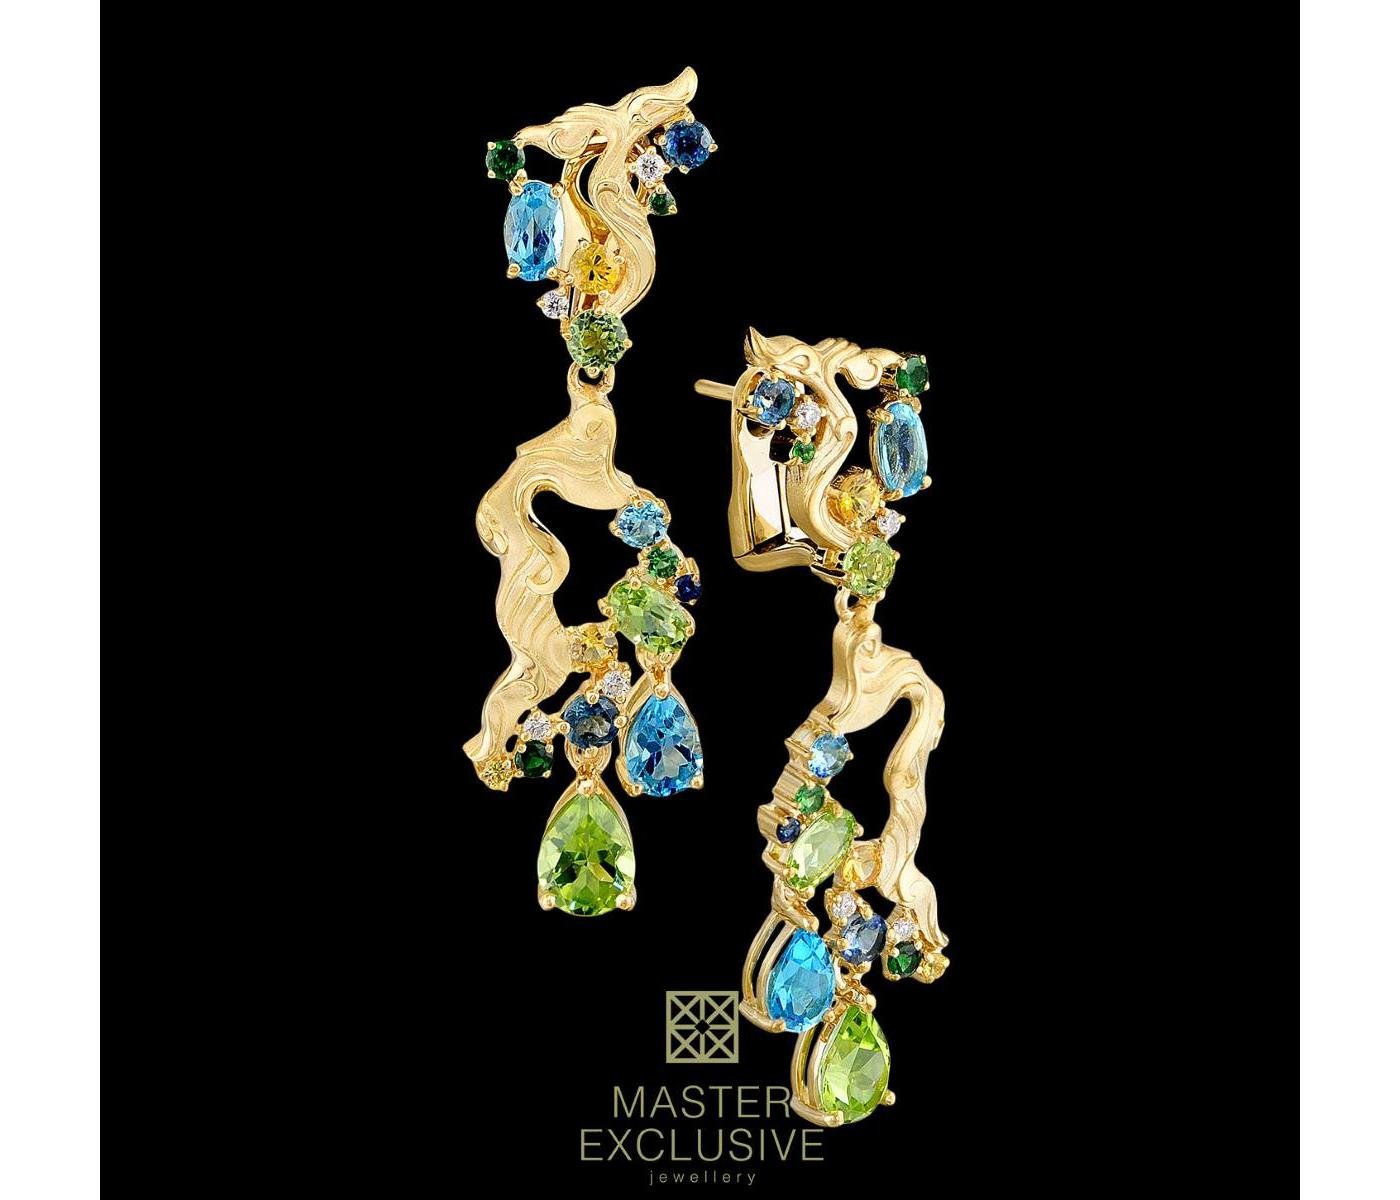 Earrings by Master Exclusive